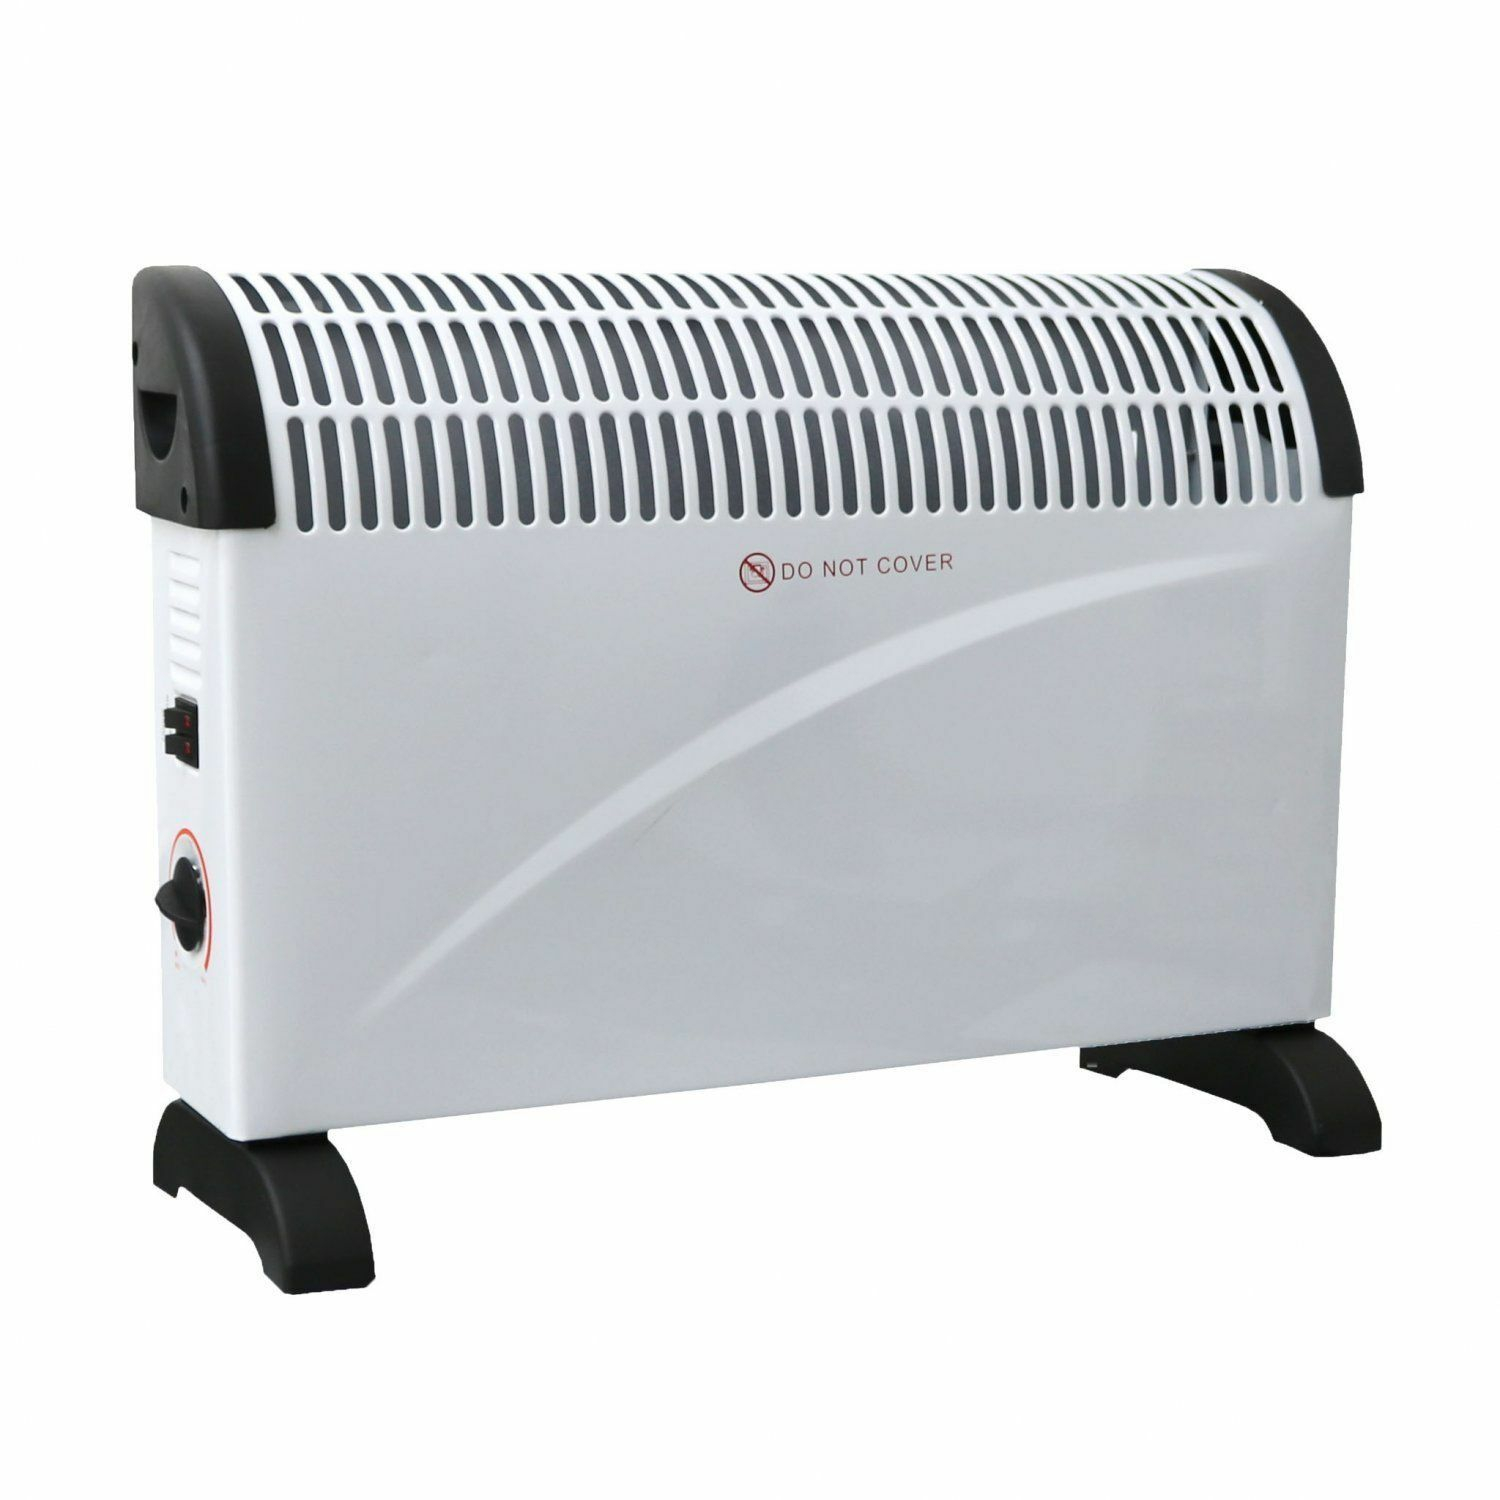 Convector Radiator Heater With Adjustable Thermostat Free Standing 2000 Watt 2kw intended for size 1500 X 1500